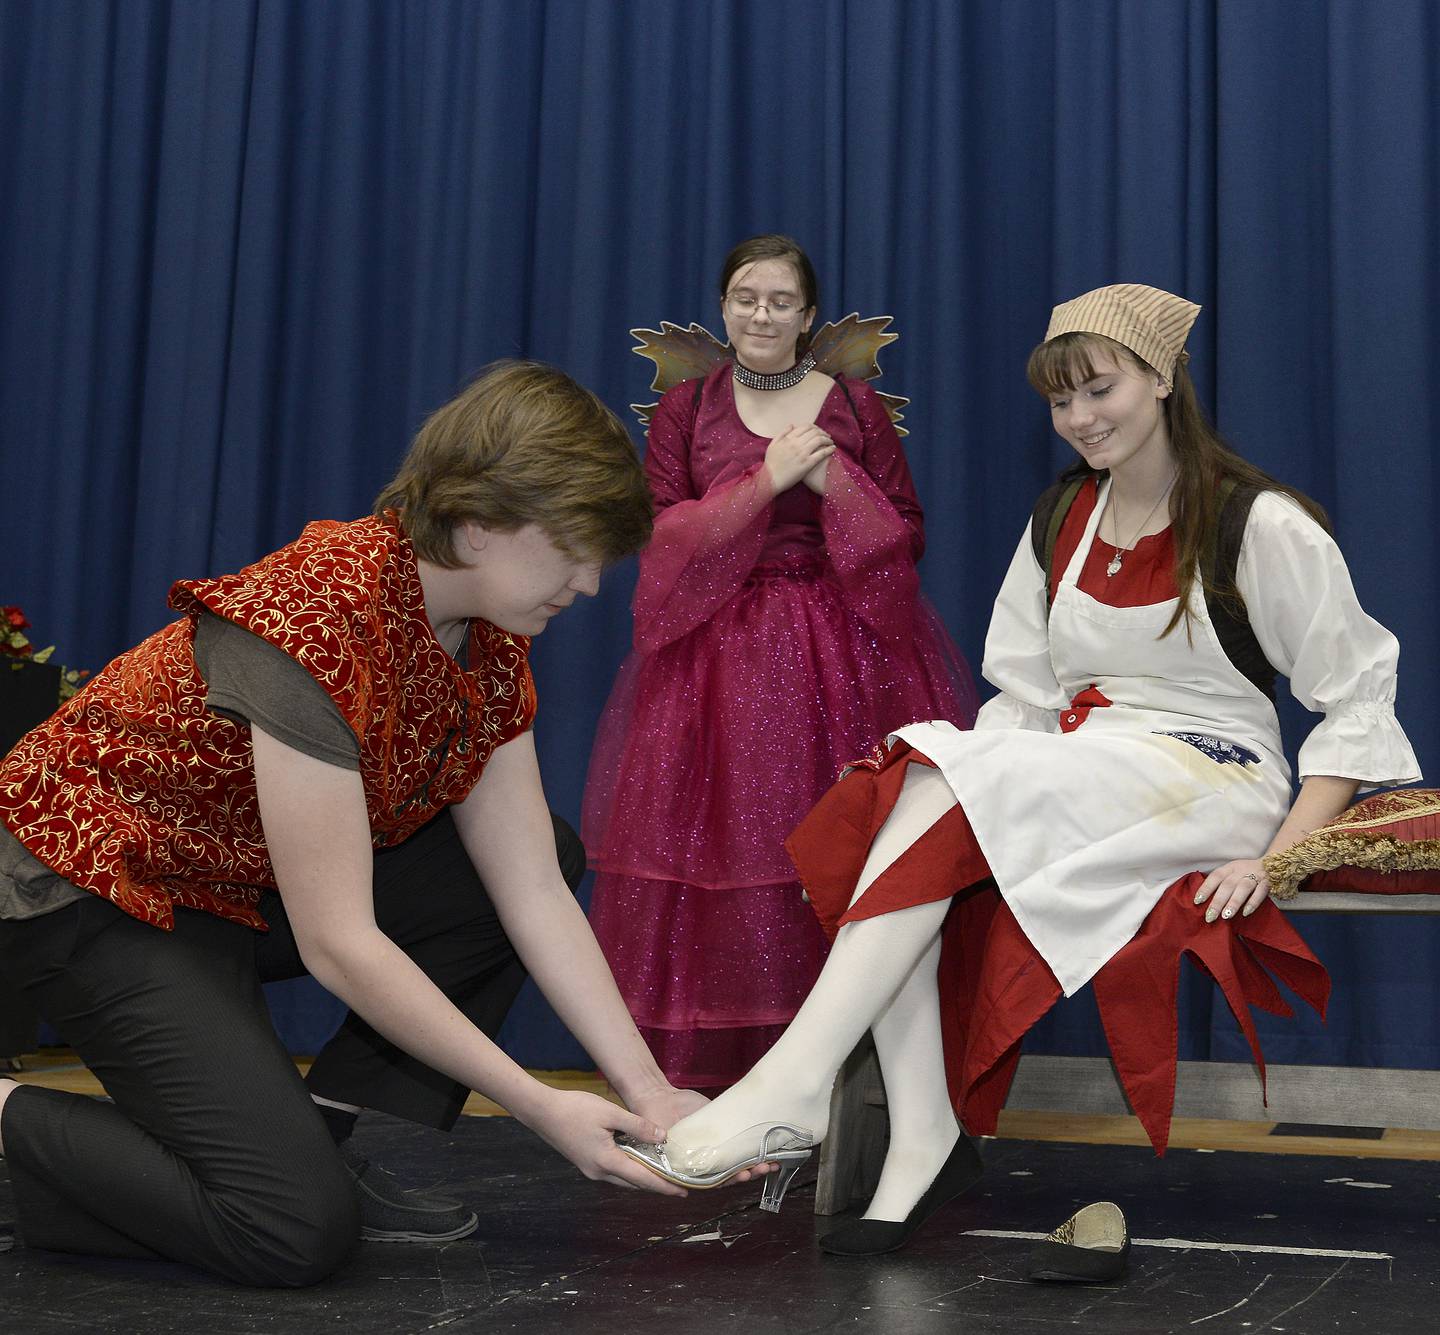 Marquette Academy students Jacob Witthuh as the Prince, tries a slipper on Ella Biggin as Cinderella, as Irene Vicich as the Fairy Godmother looks on in a scene from "Cinderella" that will be performed Friday, March 31, and Saturday, April 1, at the school.